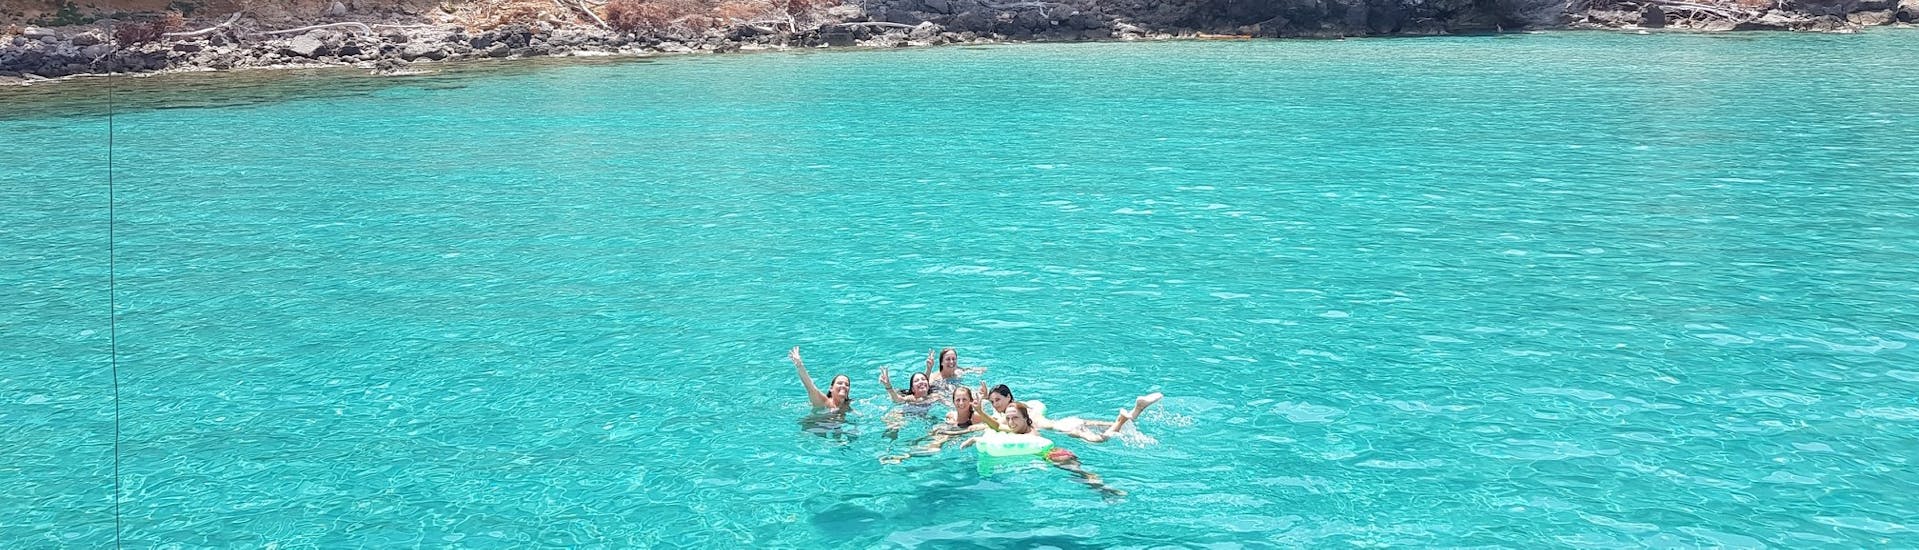 People swimming in a cave during a Boat Trip Around Mallorca's Coast with Snorkel with Royal Charters Mallorca.